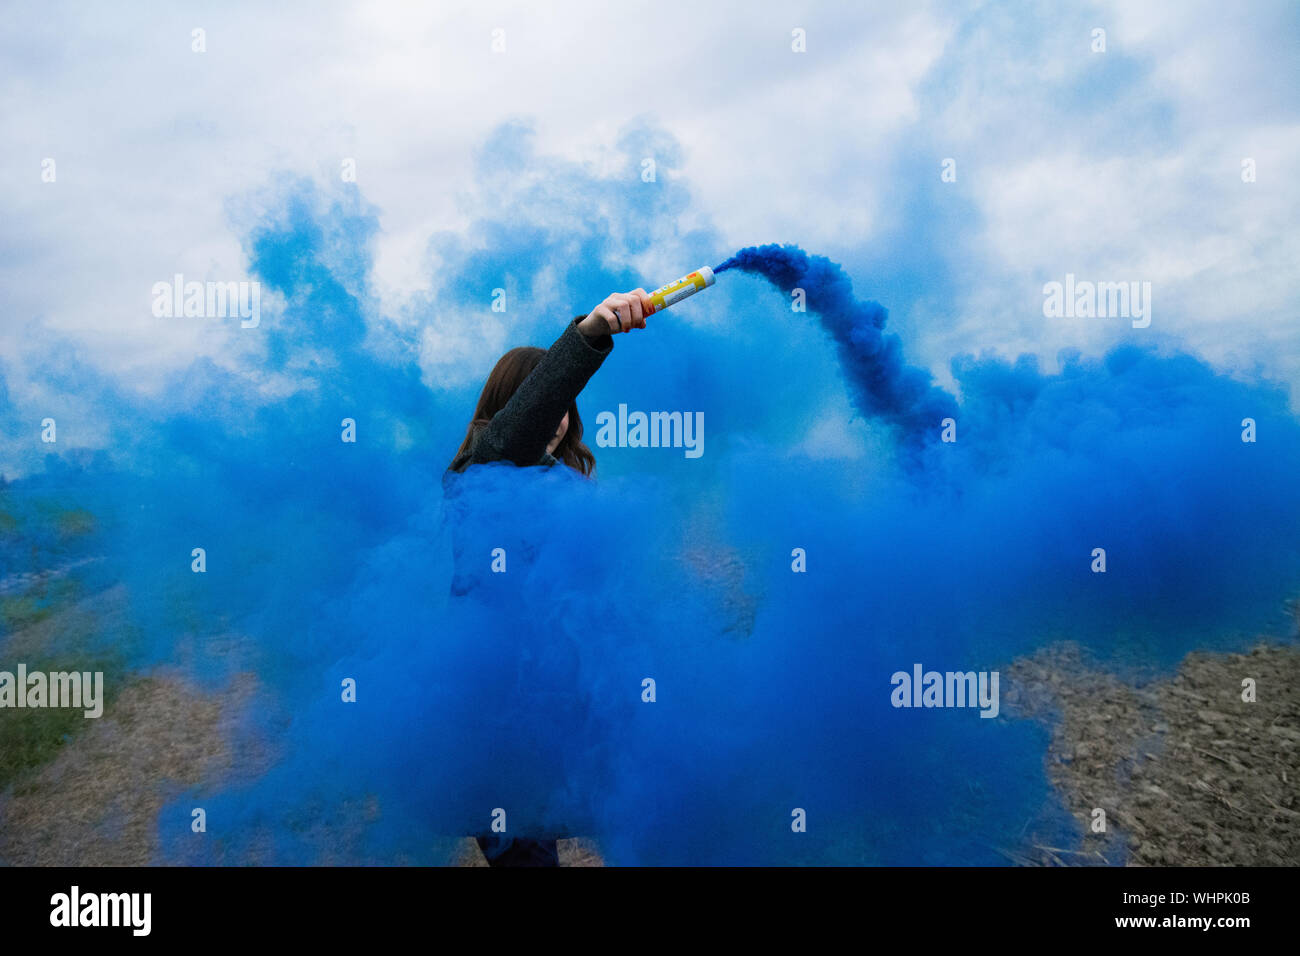 Woman Standing Amidst Distress Flare Stock Photo